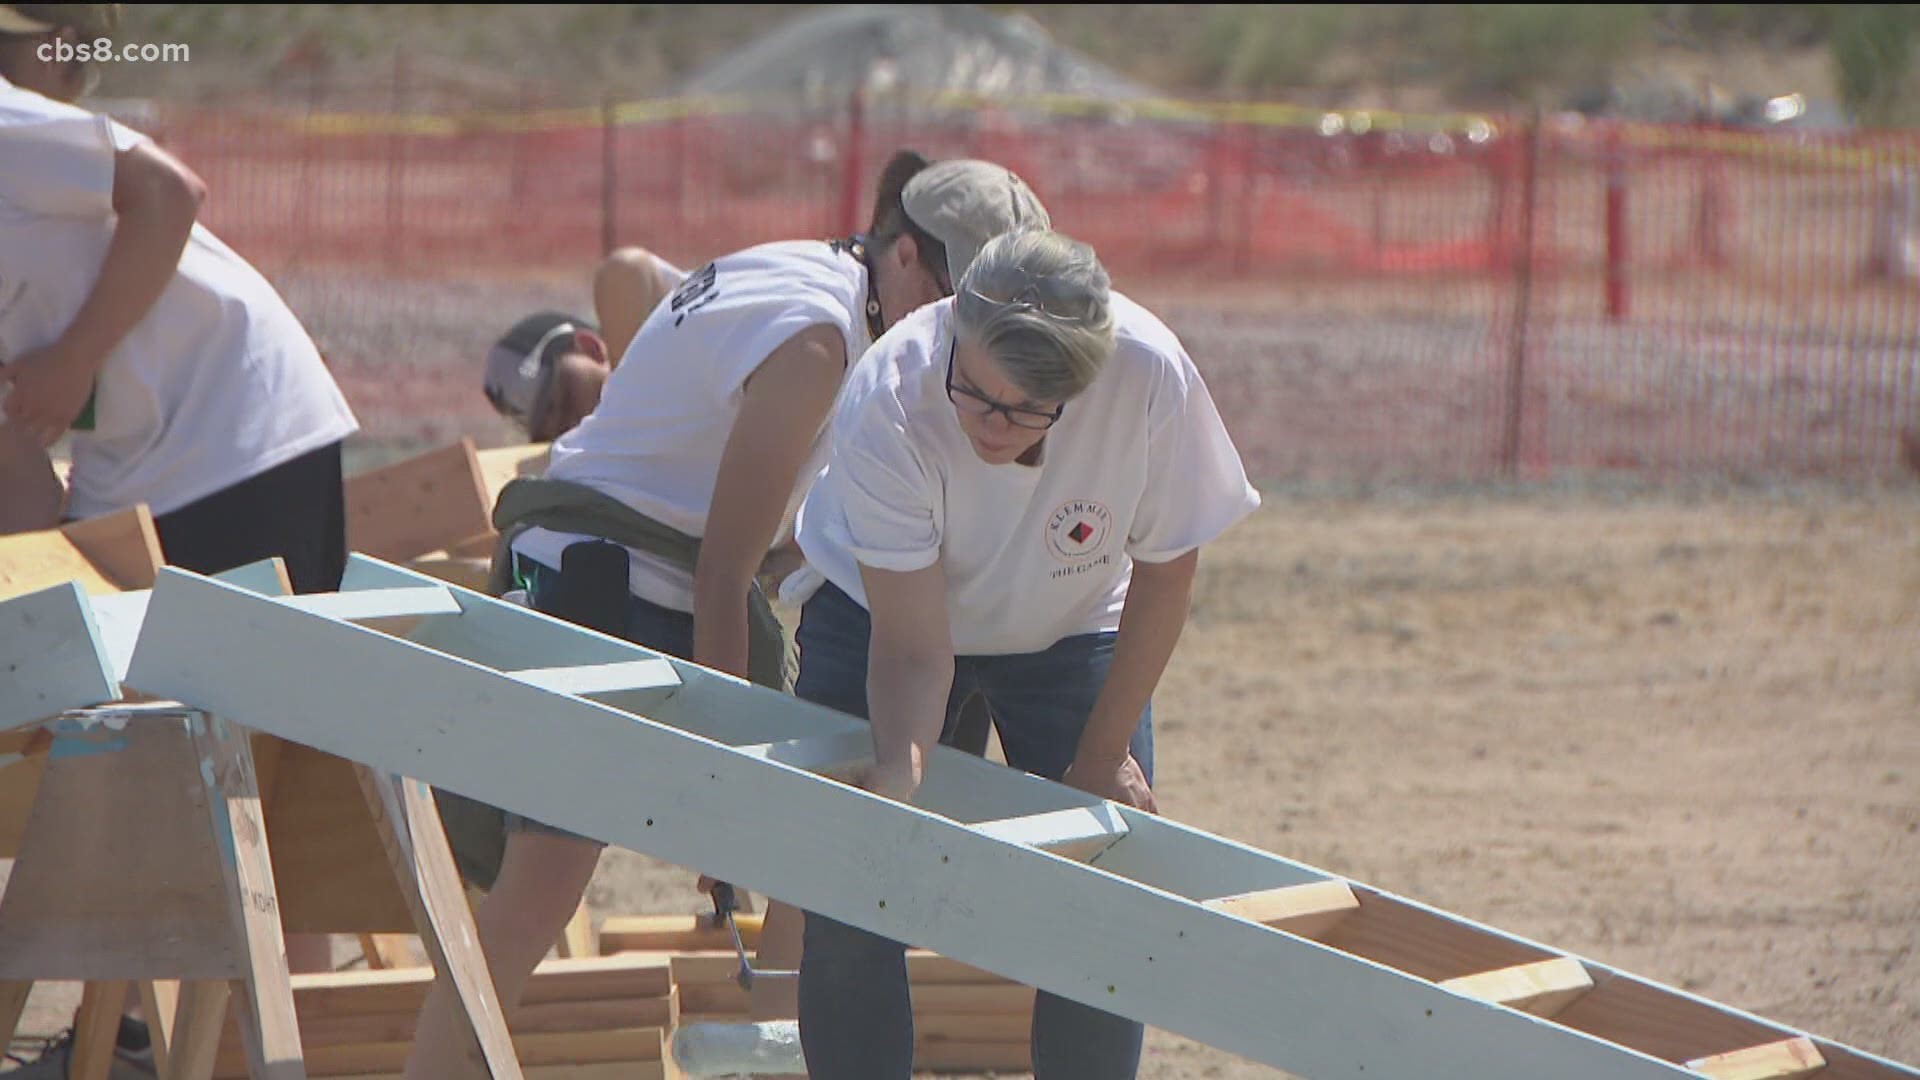 Since 1990, Paula Claussen and her group of volunteers at Project Mercy Baja have built over 1,600 houses for families between Tijuana and Tecate.